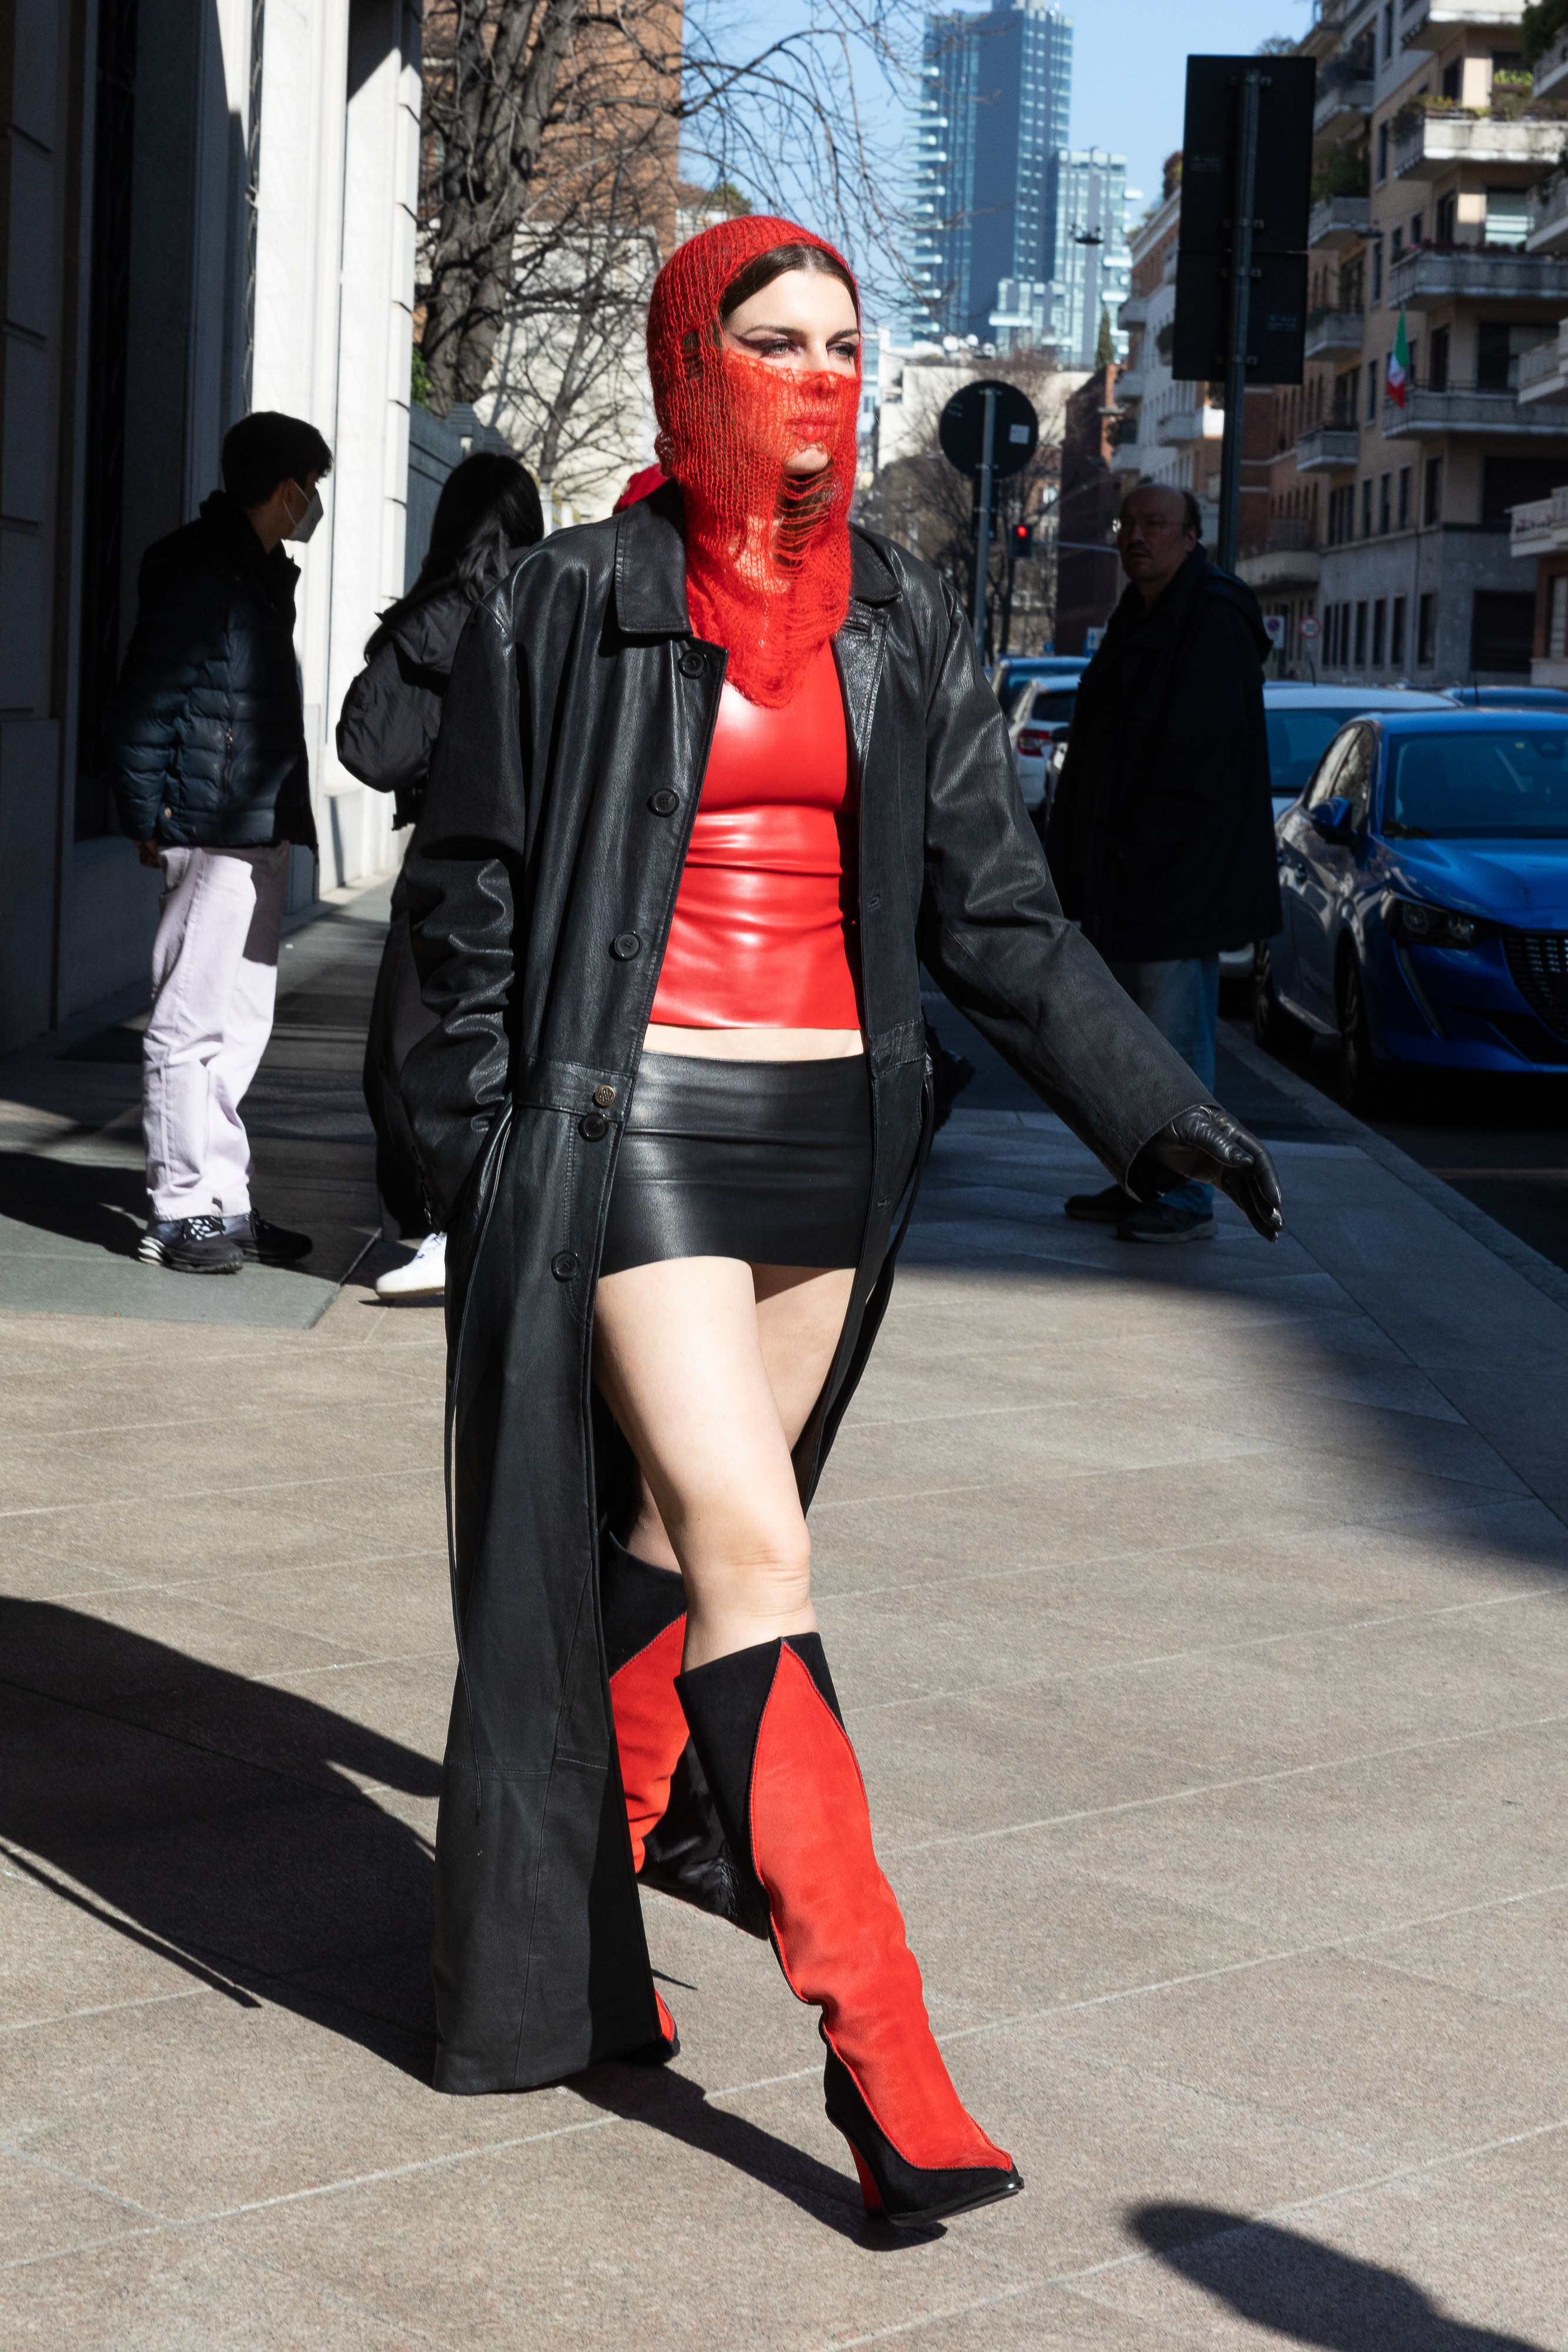 Julia wears a red leather top, black micro mini skirt and a red knit face covering